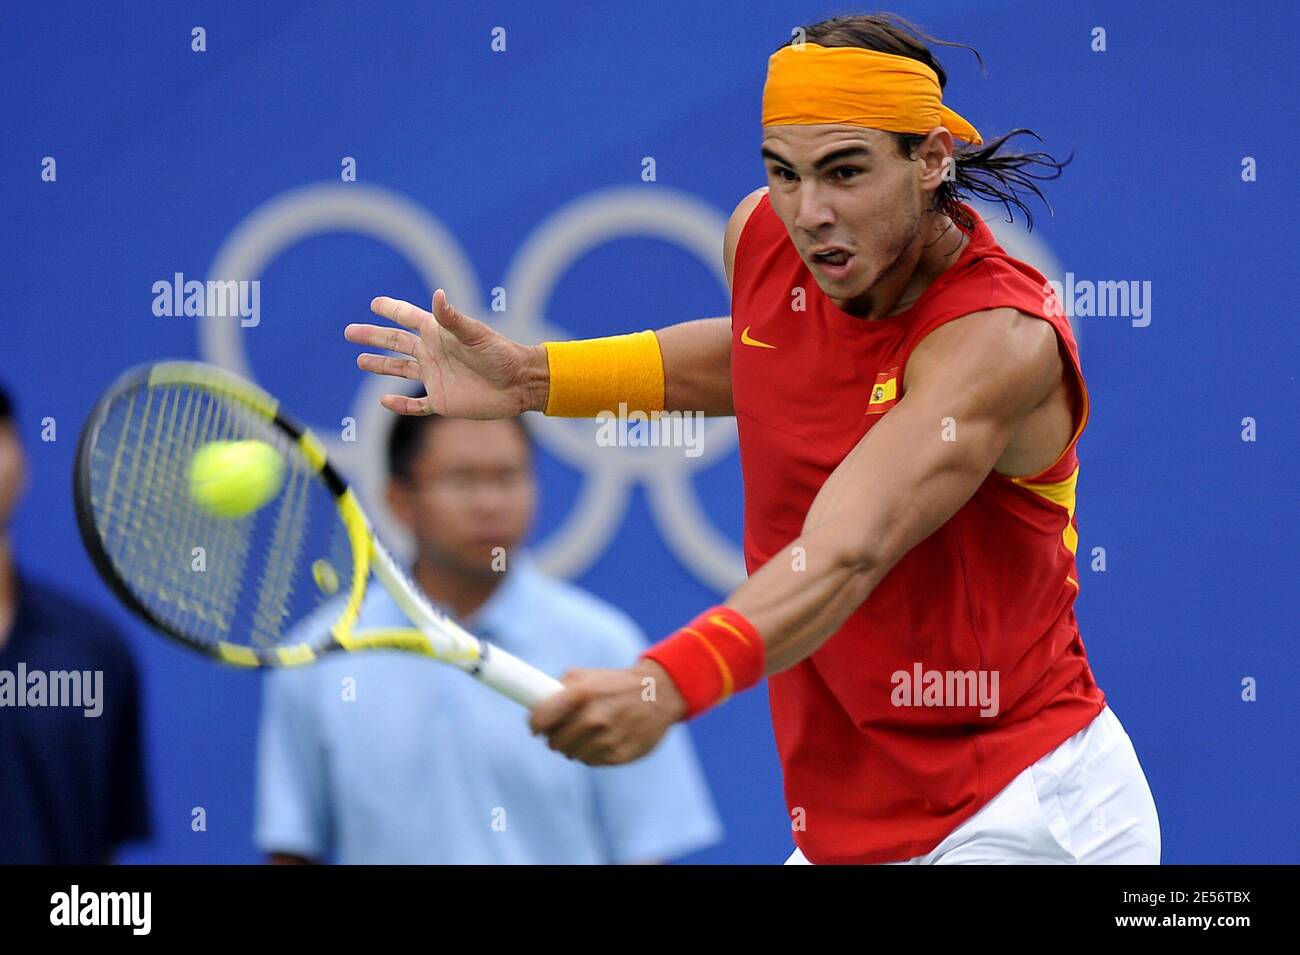 Spain's Rafael Nadal defeats, 6-3, 7-6, 6-3, Chile's Fernando Gonzalez in  their Men's Gold Final Tennis match of the Beijing 2008 Olympic Games Day 9  at the Olympic Green Tennis Center in